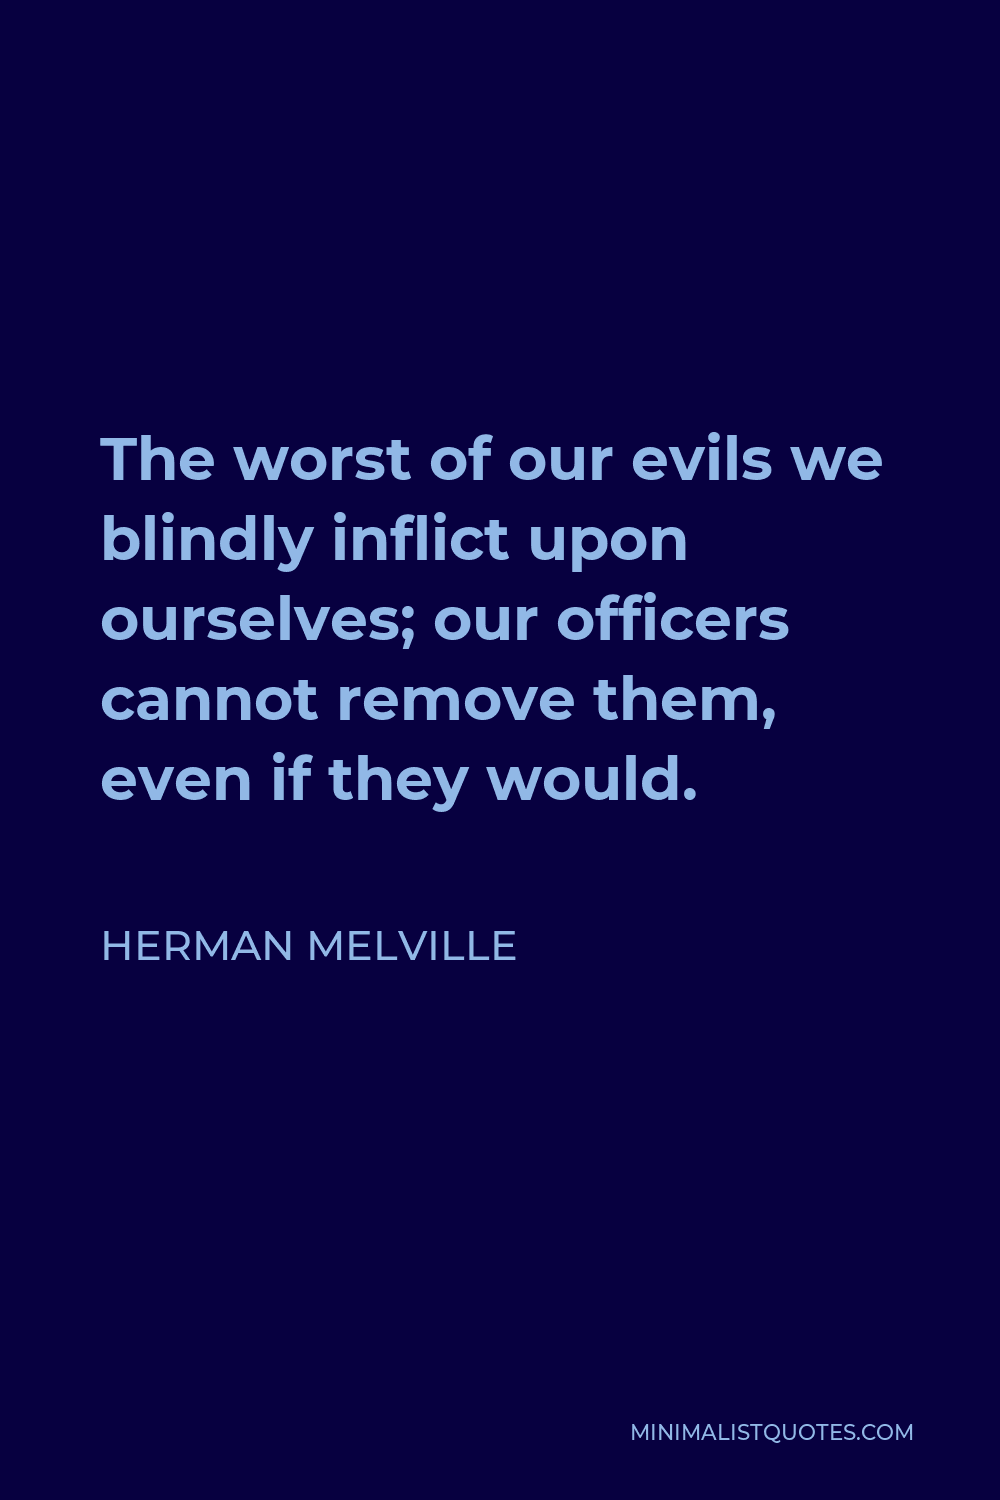 Herman Melville Quote - The worst of our evils we blindly inflict upon ourselves; our officers cannot remove them, even if they would.